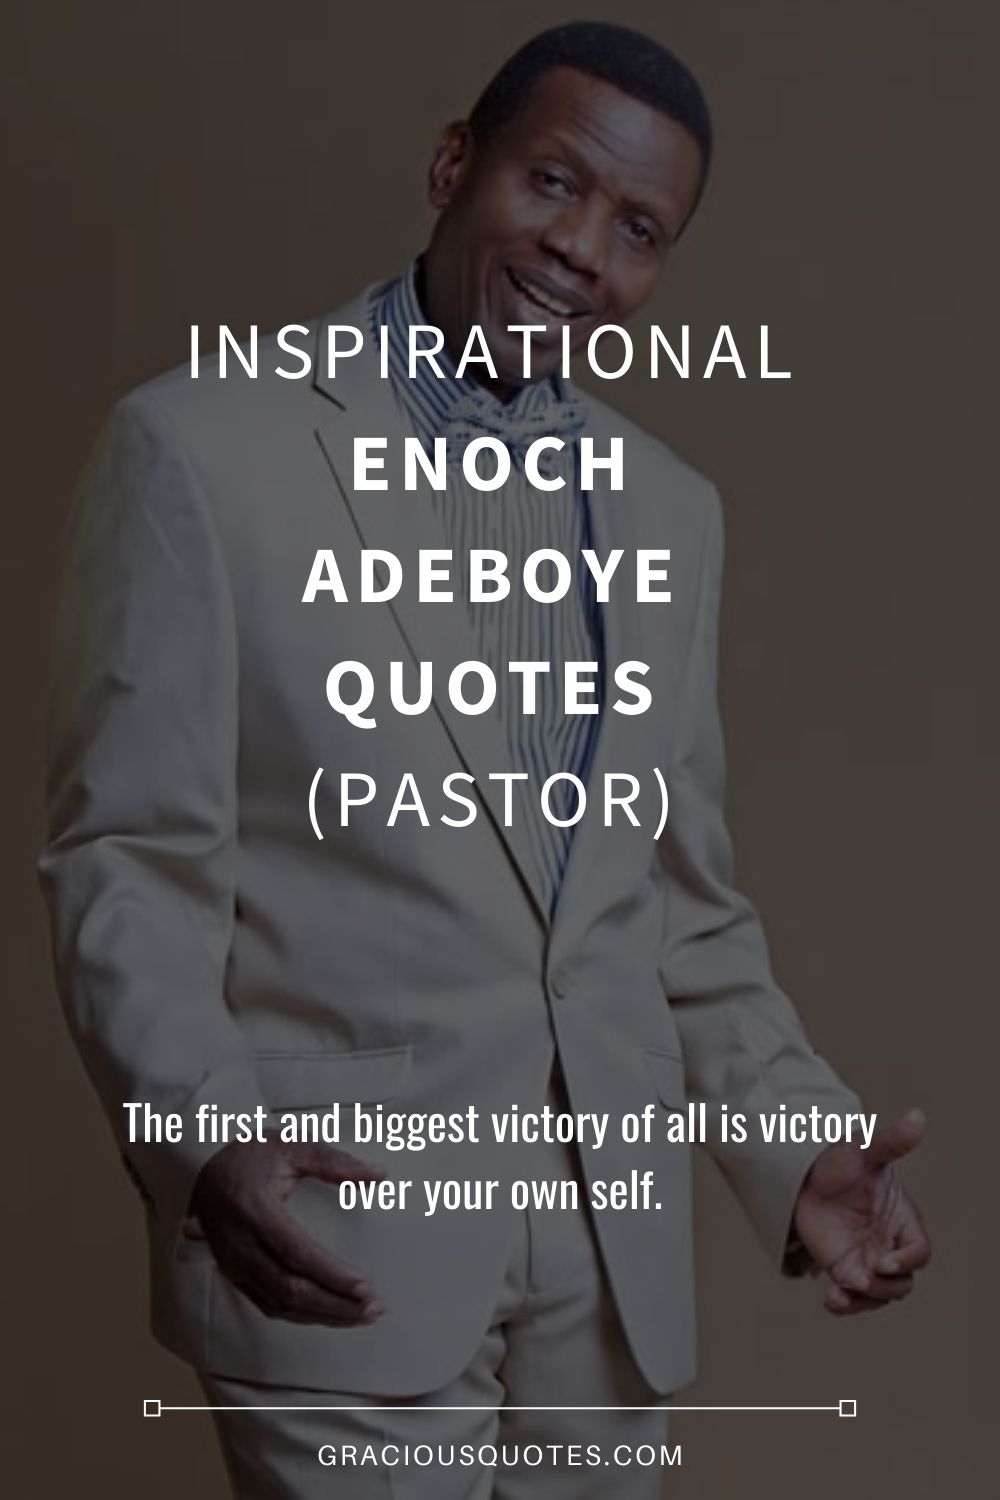 Inspirational Enoch Adeboye Quotes (PASTOR) - Gracious Quotes